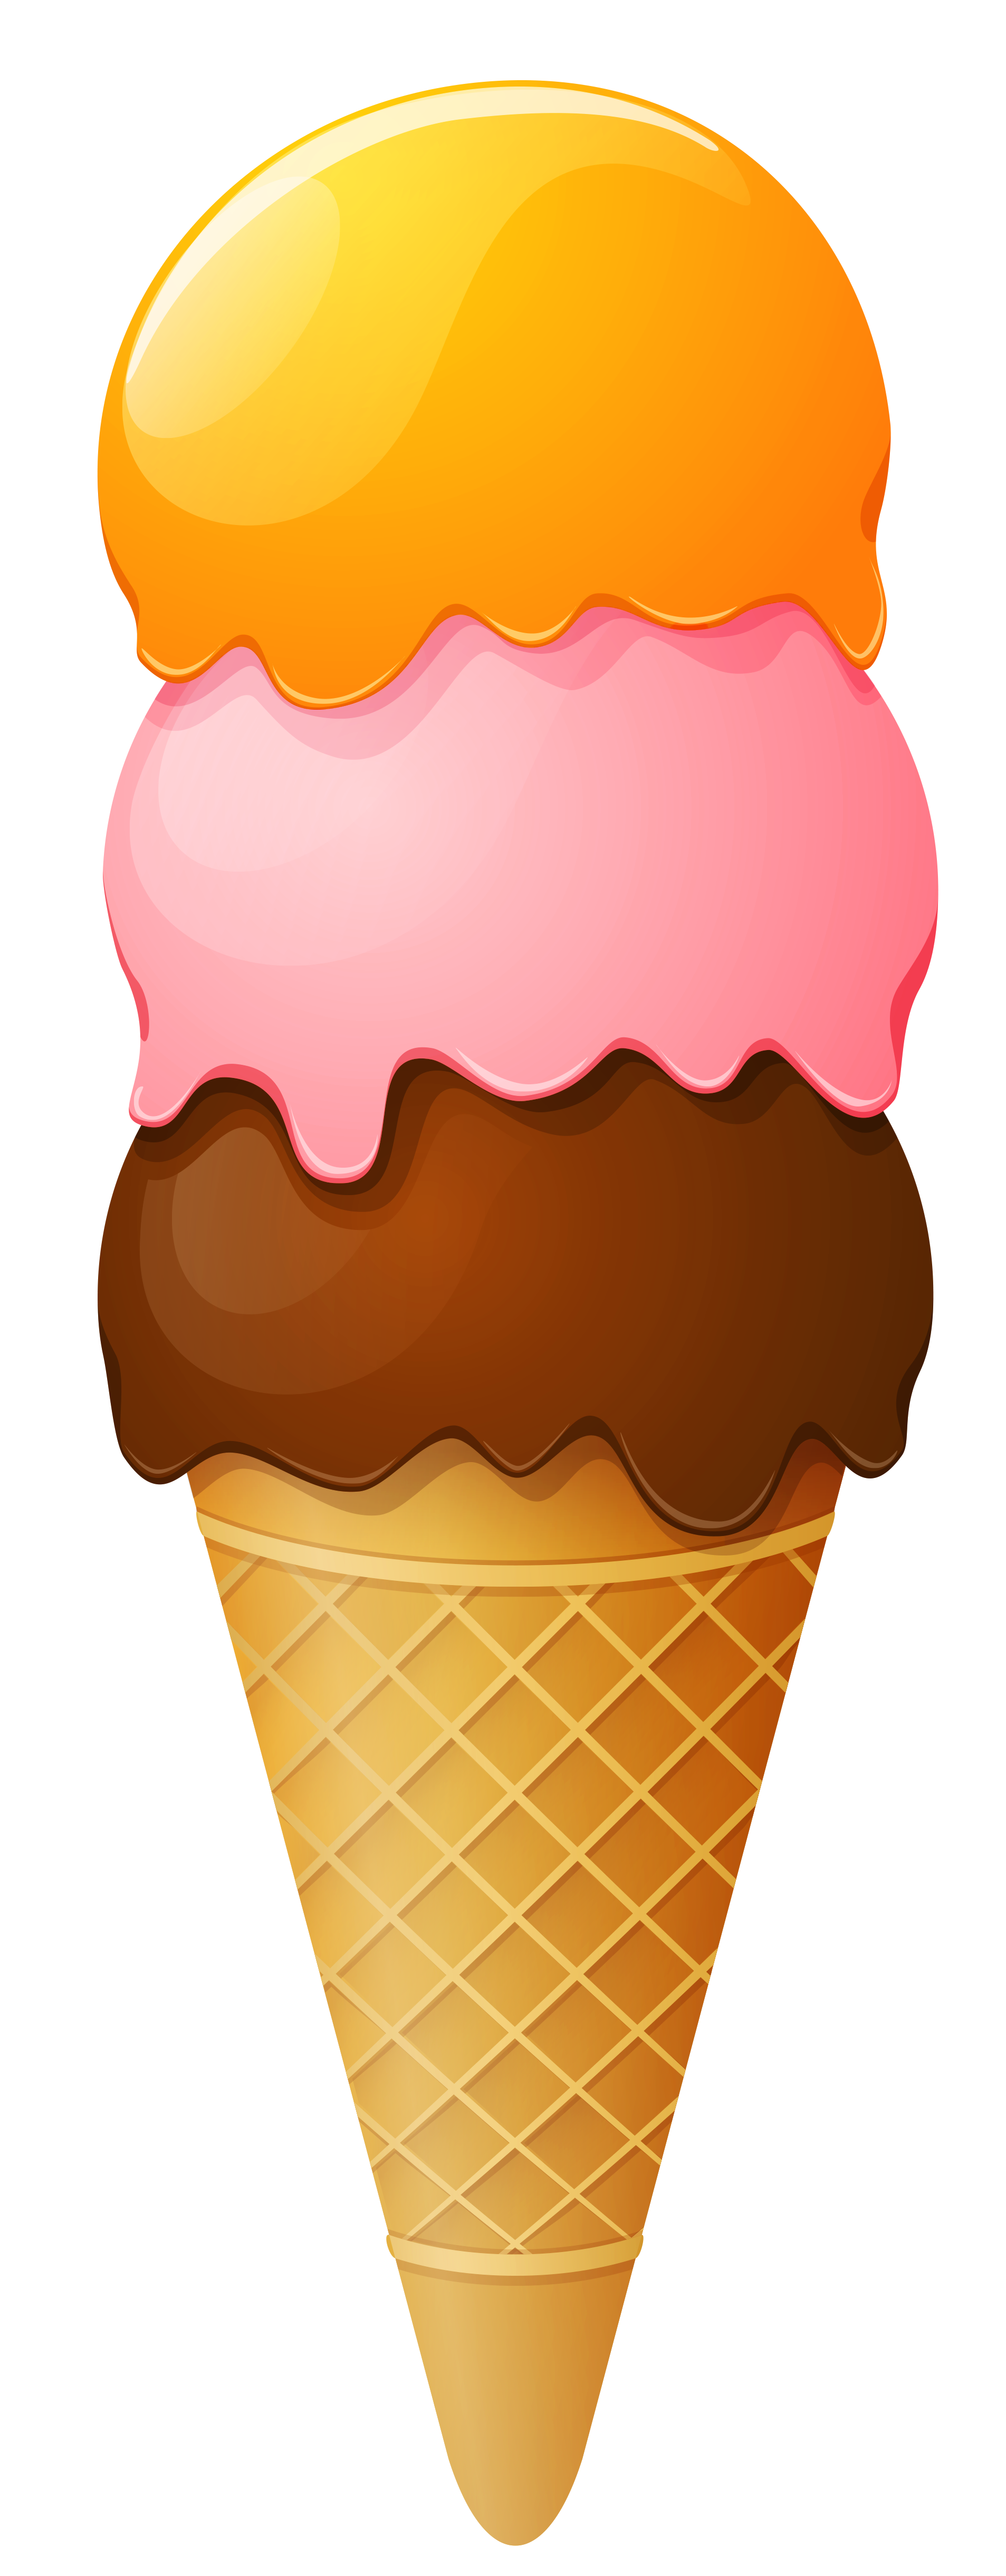 Watermelon clipart ice cream. At getdrawings com free